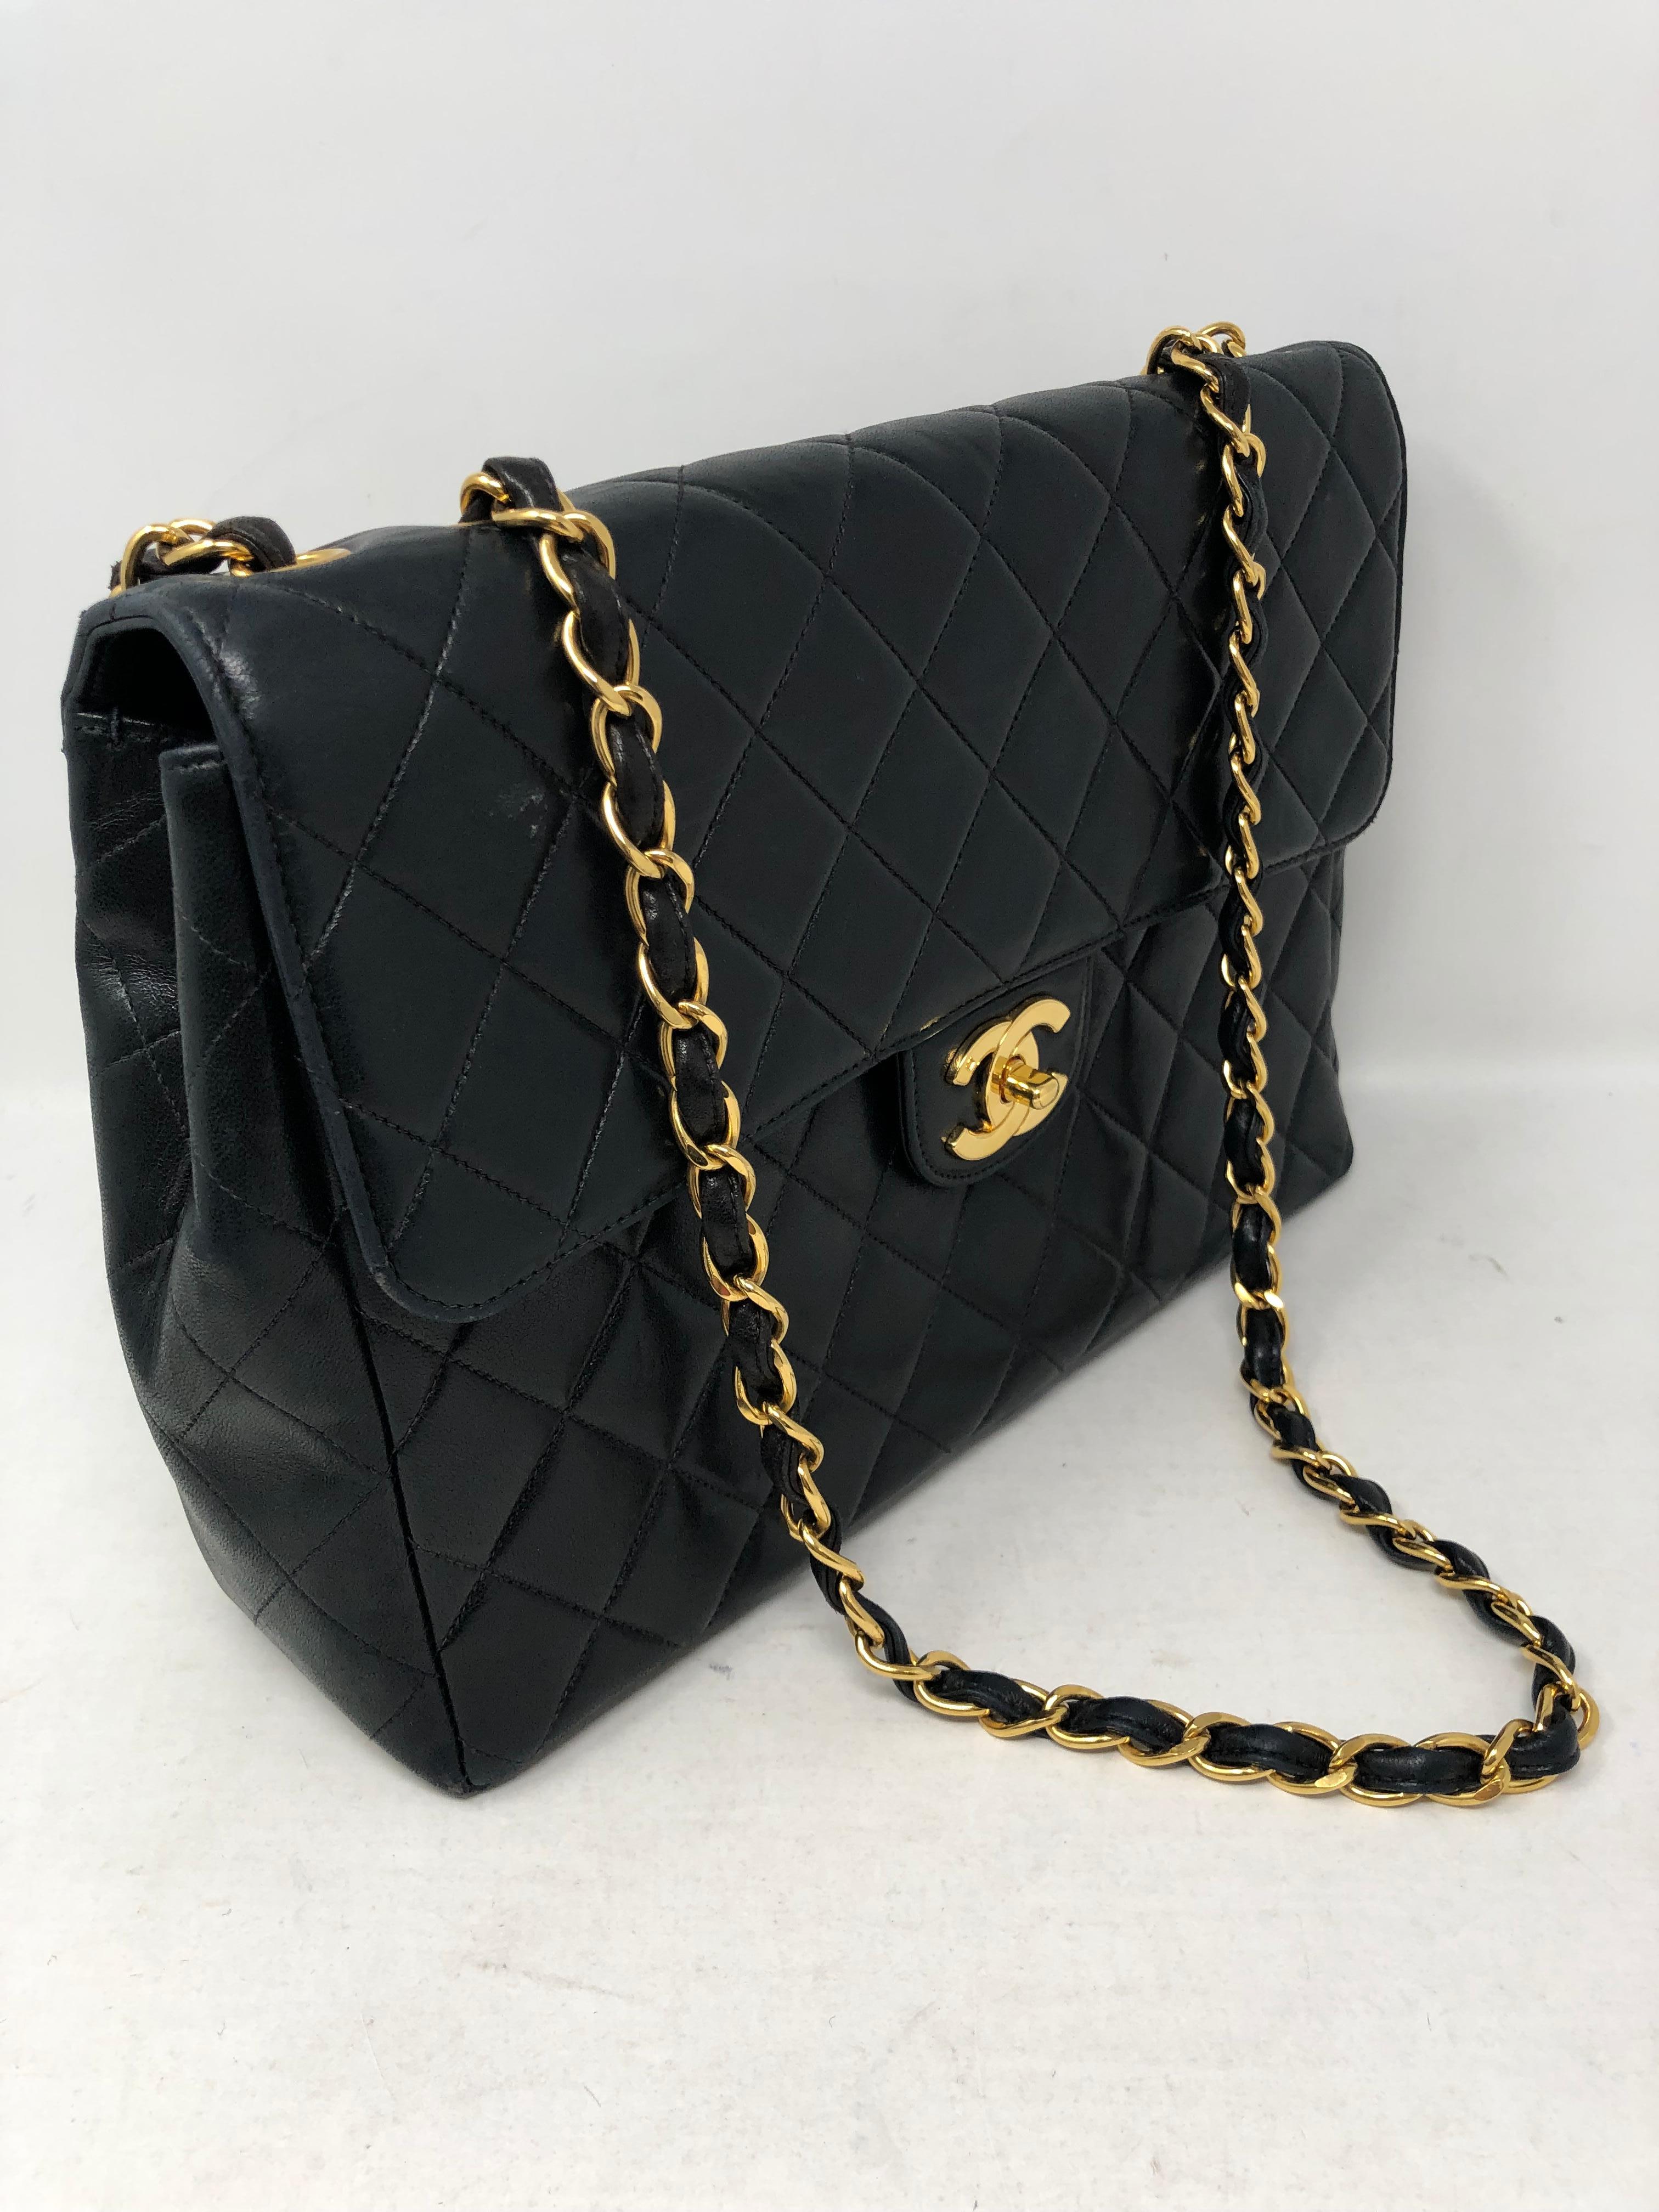 Chanel Black Lambskin Leather Jumbo. Vintage Jumbo Matelasse with gold hardware. Can be worn as crossbody or doubled strap shoulder bag. Classic style and Collector's piece. Black leather interior. Includes authenticity card and dust cover. Good